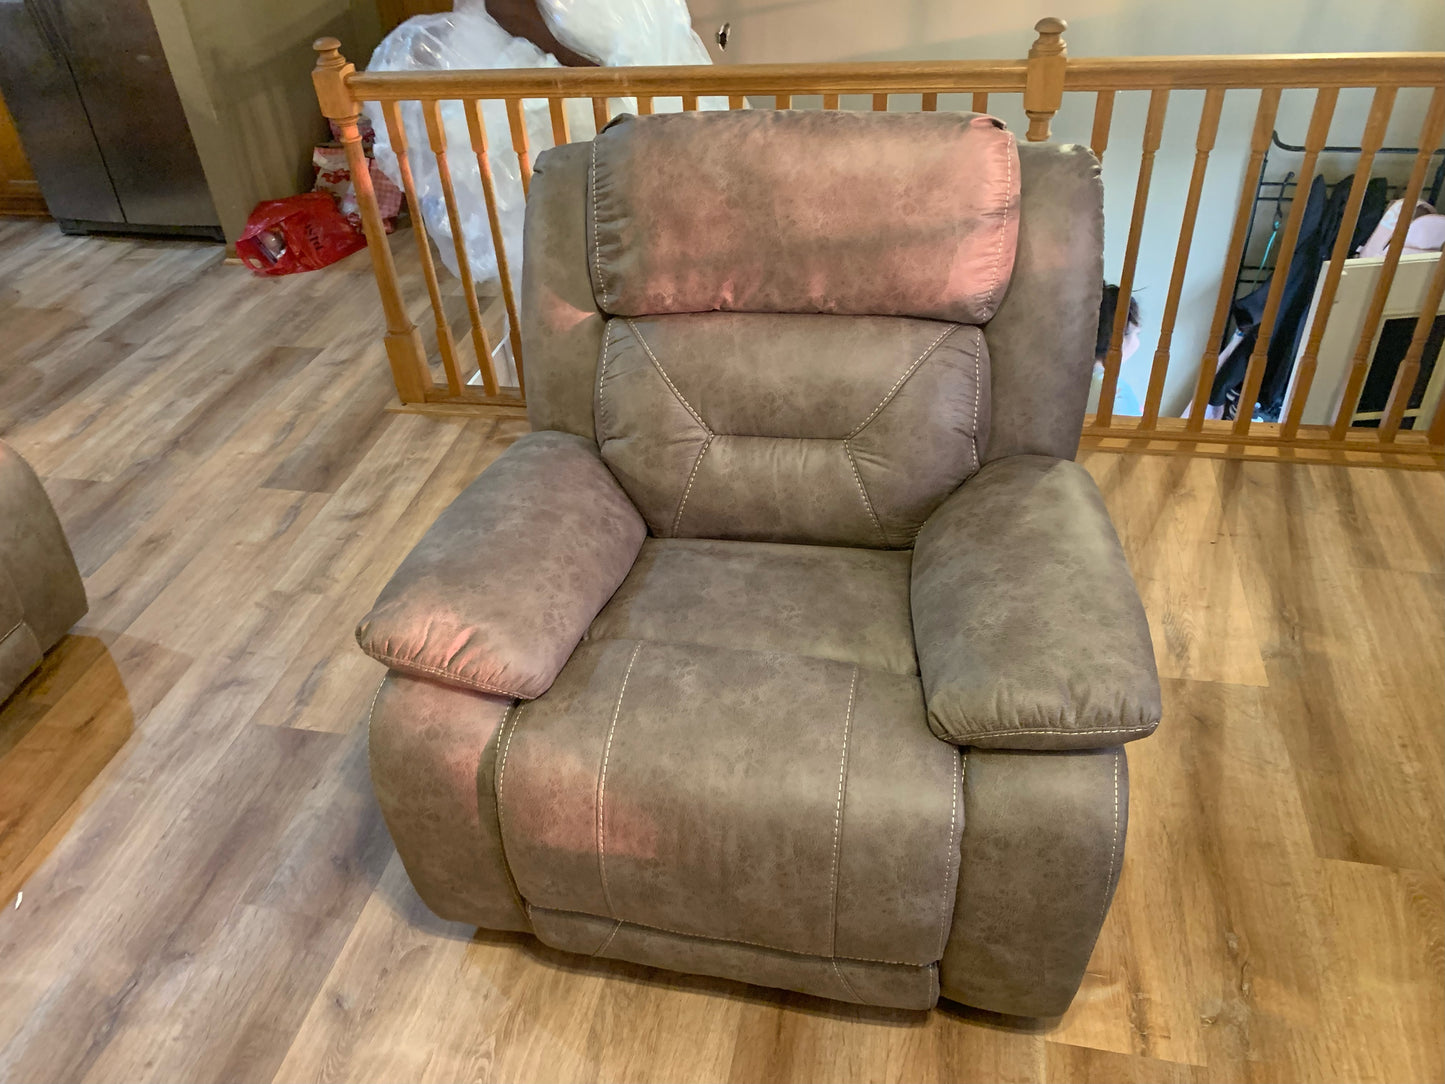 WEEKLY or MONTHLY. Ariana Desert Sand Double Power Recliner